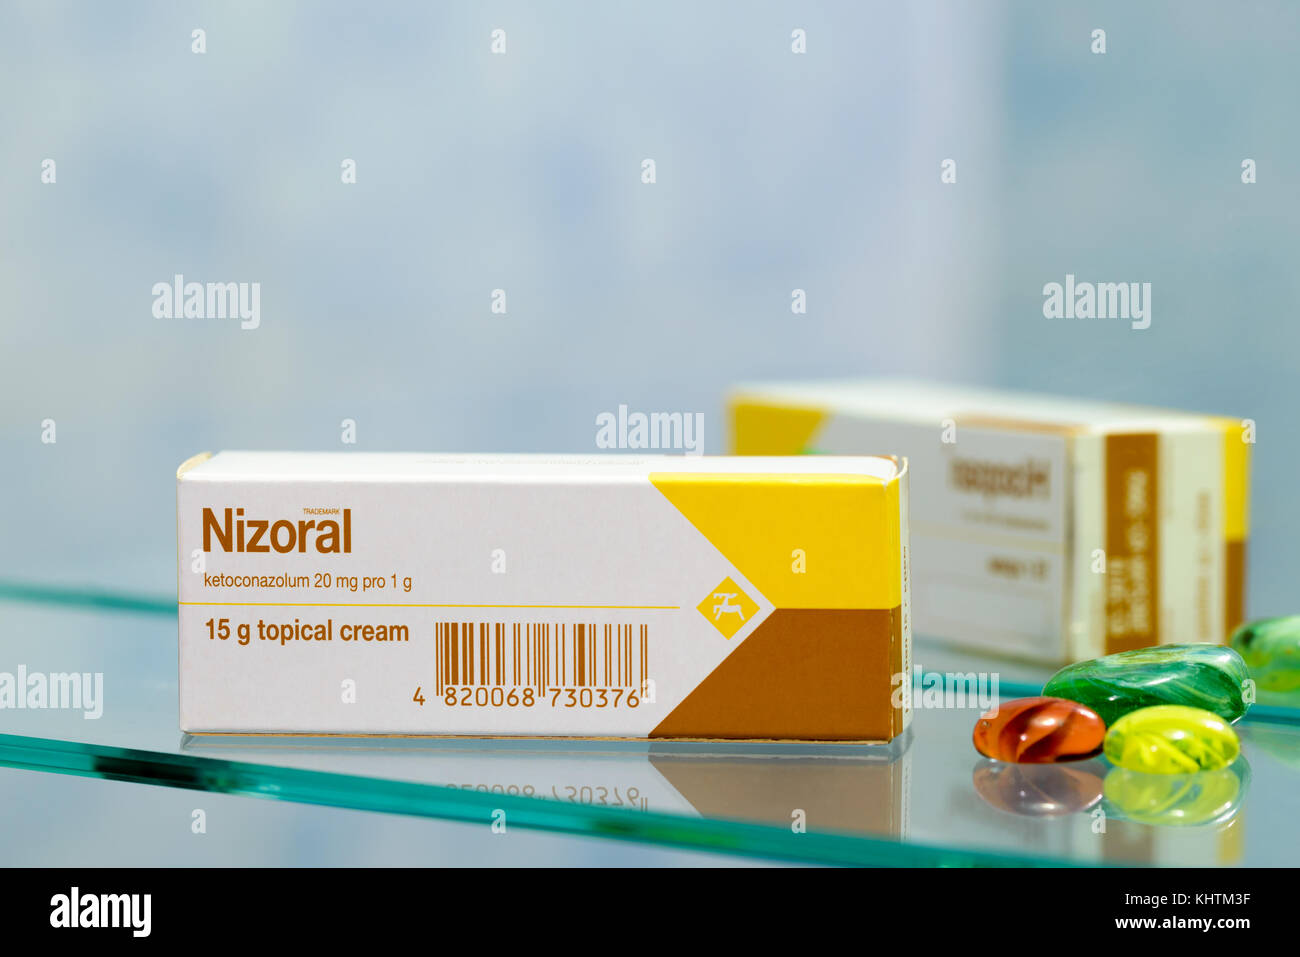 Kiev/Ukraine - August 27, 2017 - Nizoral cream contains the active ingredient ketoconazole, which is a type of medicine called an antifungal. It is us Stock Photo